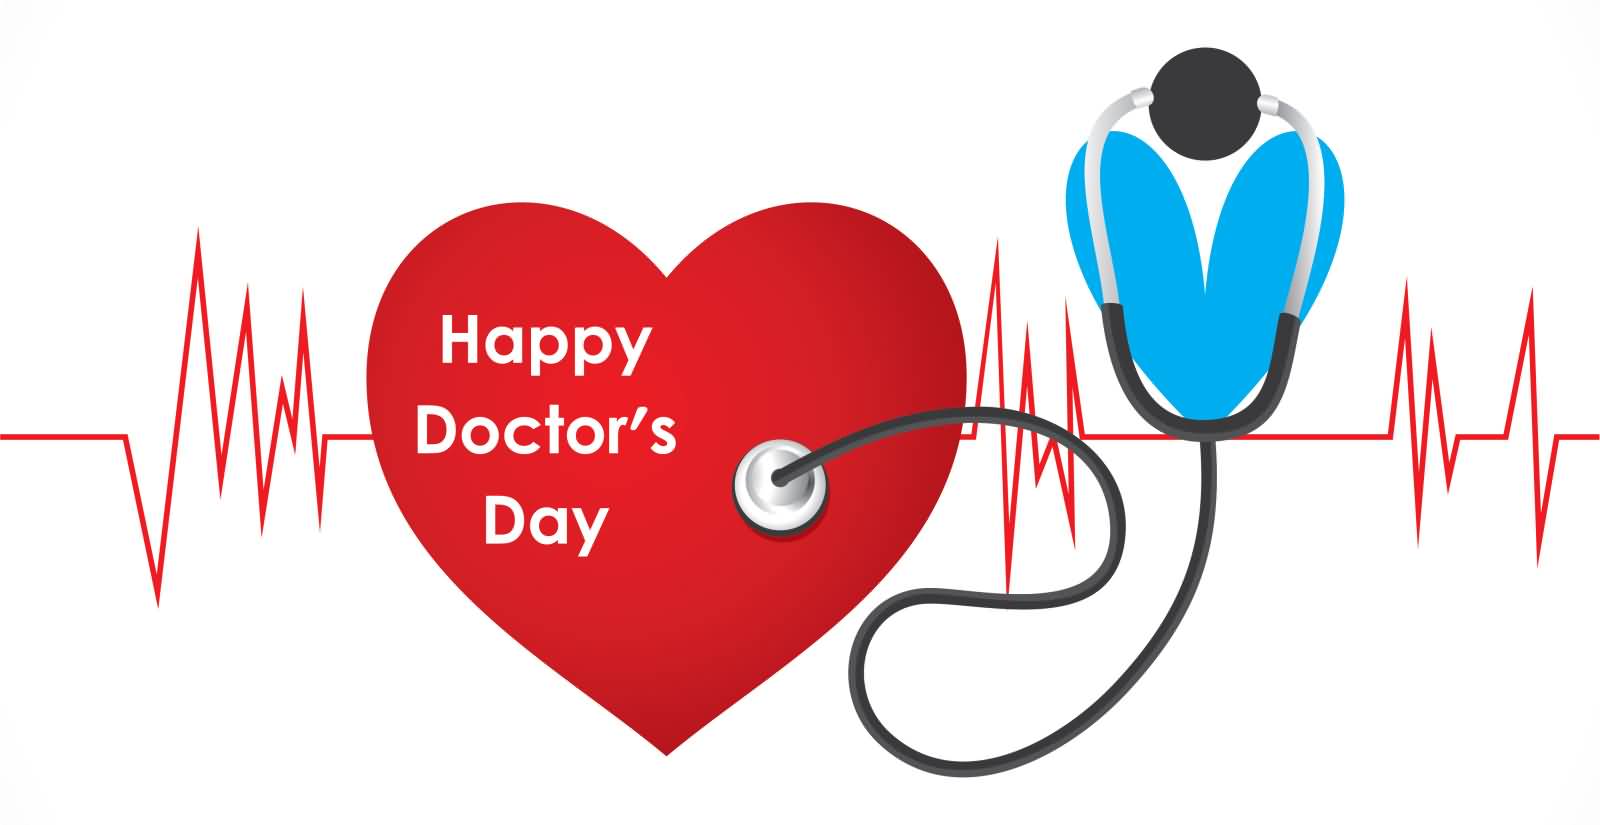 Happy Doctor’s Day Heart